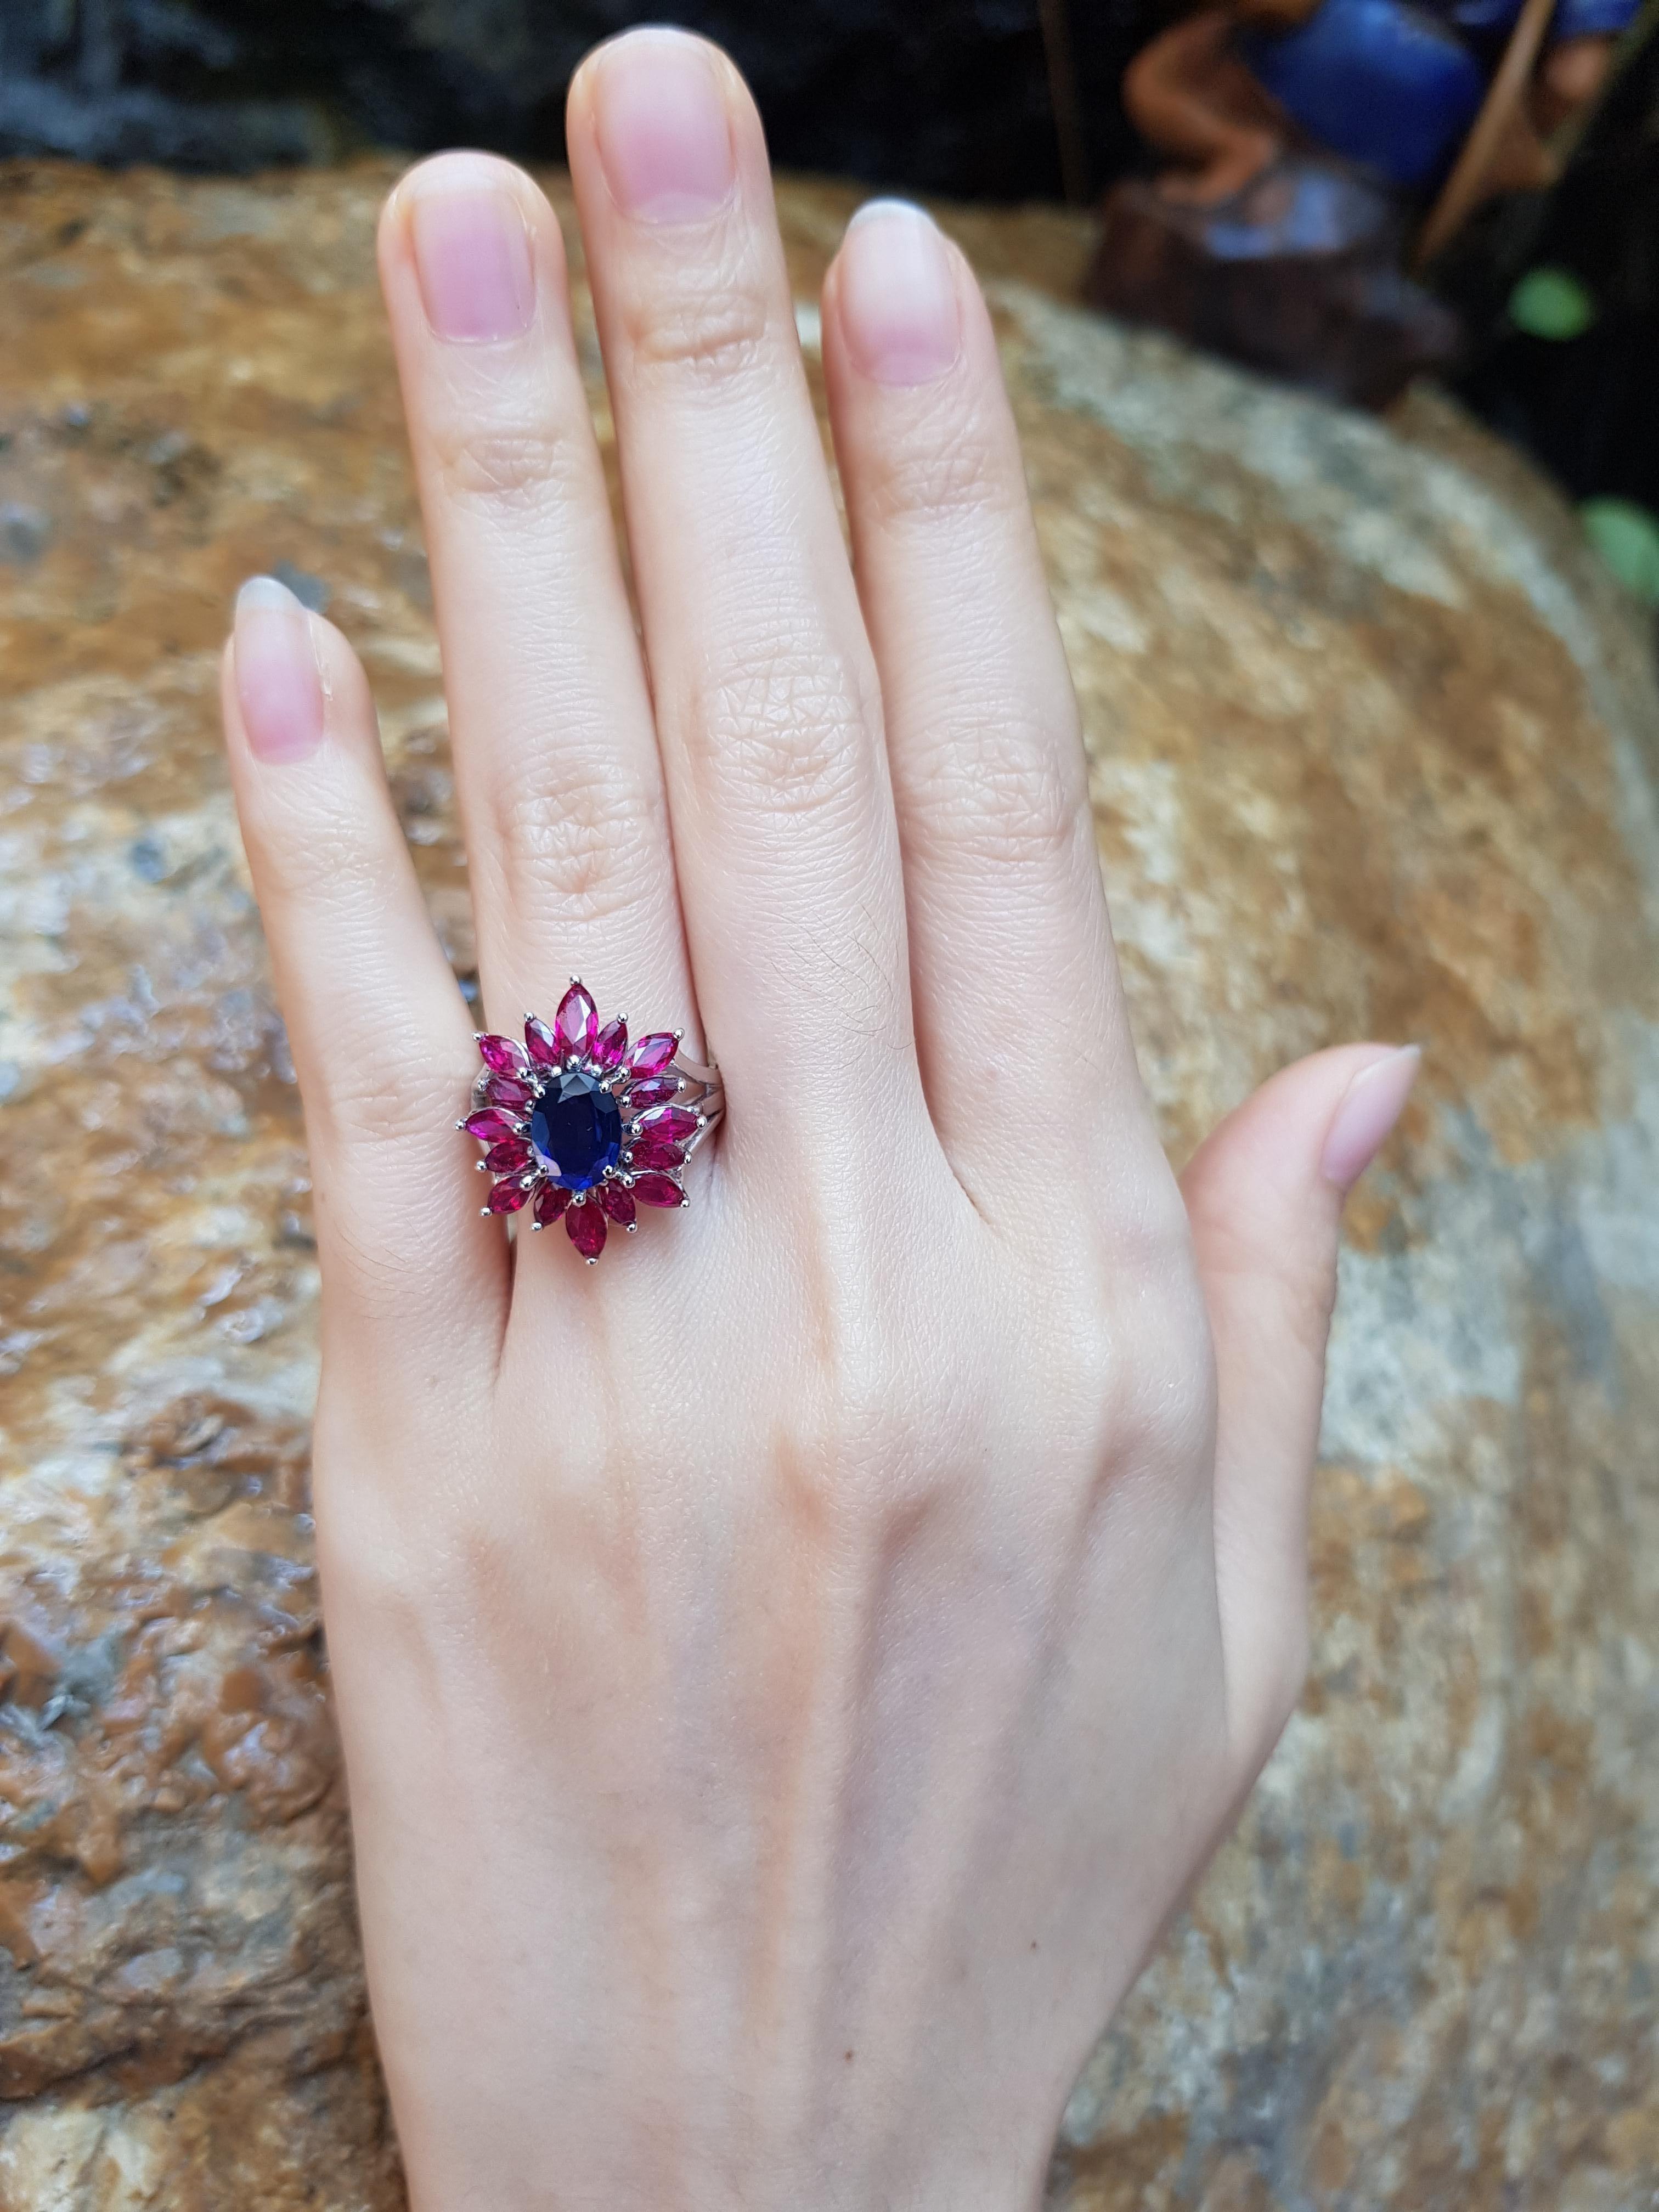 Blue Sapphire 1.41 carats with Ruby 2.28 carats Ring set in 18 Karat White Gold Settings

Width:  1.6 cm 
Length: 2.1 cm
Ring Size: 51
Total Weight: 6.64 grams

